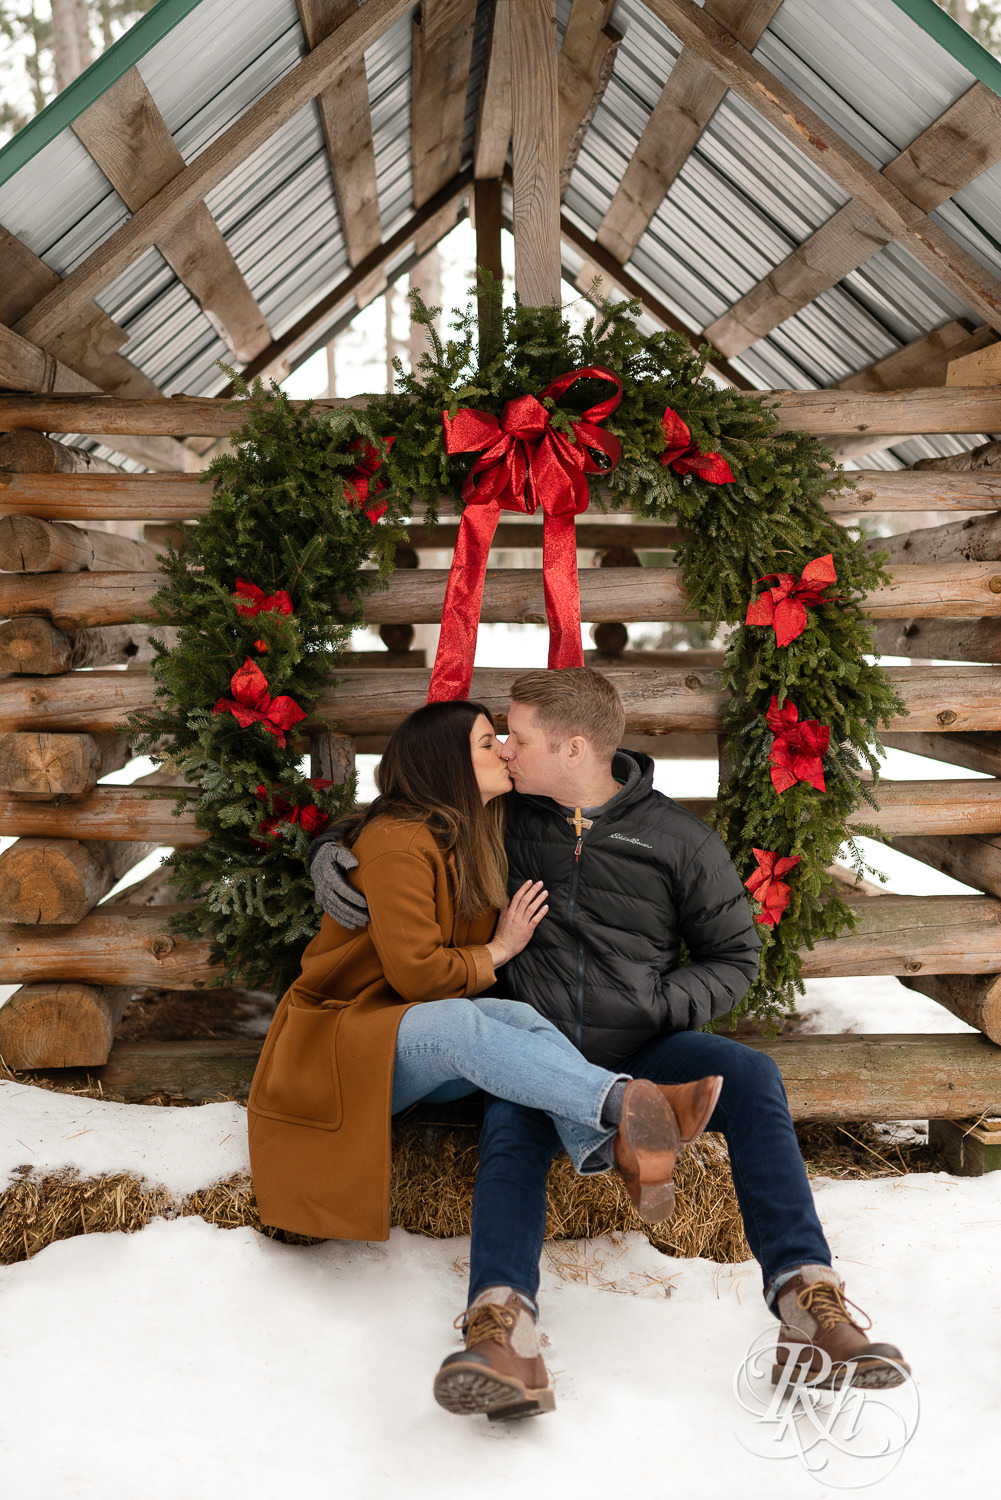 Man and woman kissing in front of Christmas wreath in the snow at Hansen Tree Farm in Anoka, Minnesota.